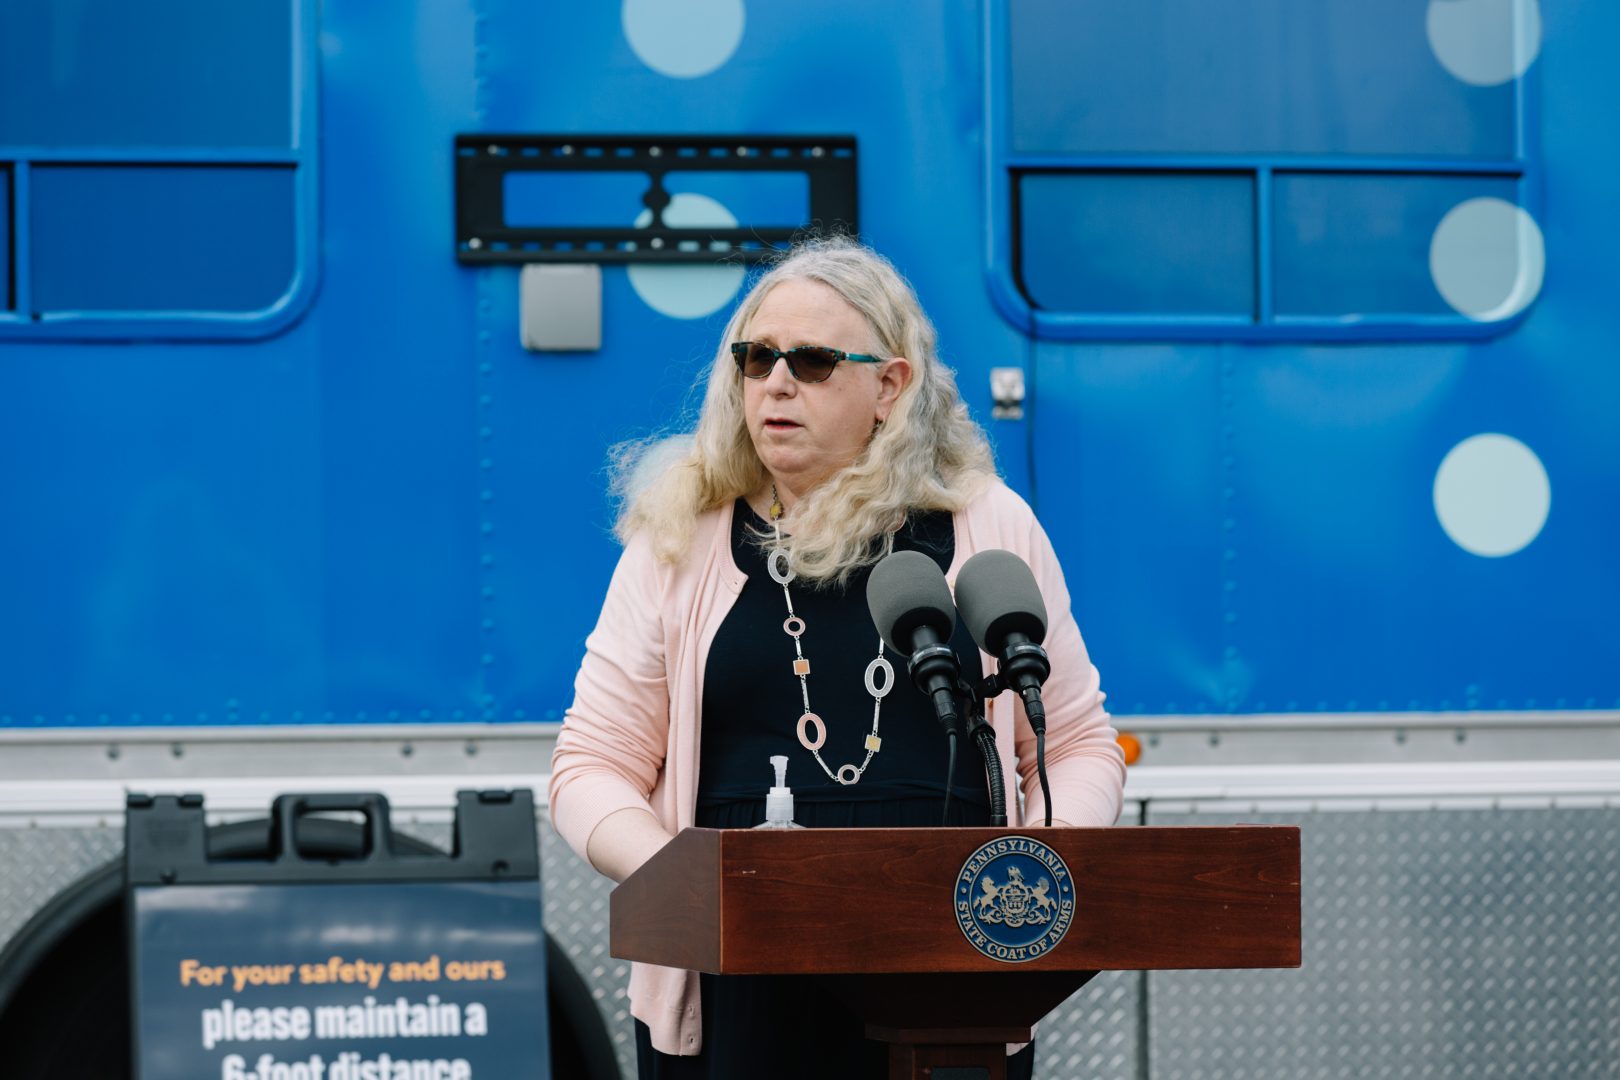 Pennsylvania Health Secretary Rachel Levine at a press event unveiling the CATE mobile COVID-19 testing unit in Harrisburg, Pa. on August 25, 2020.